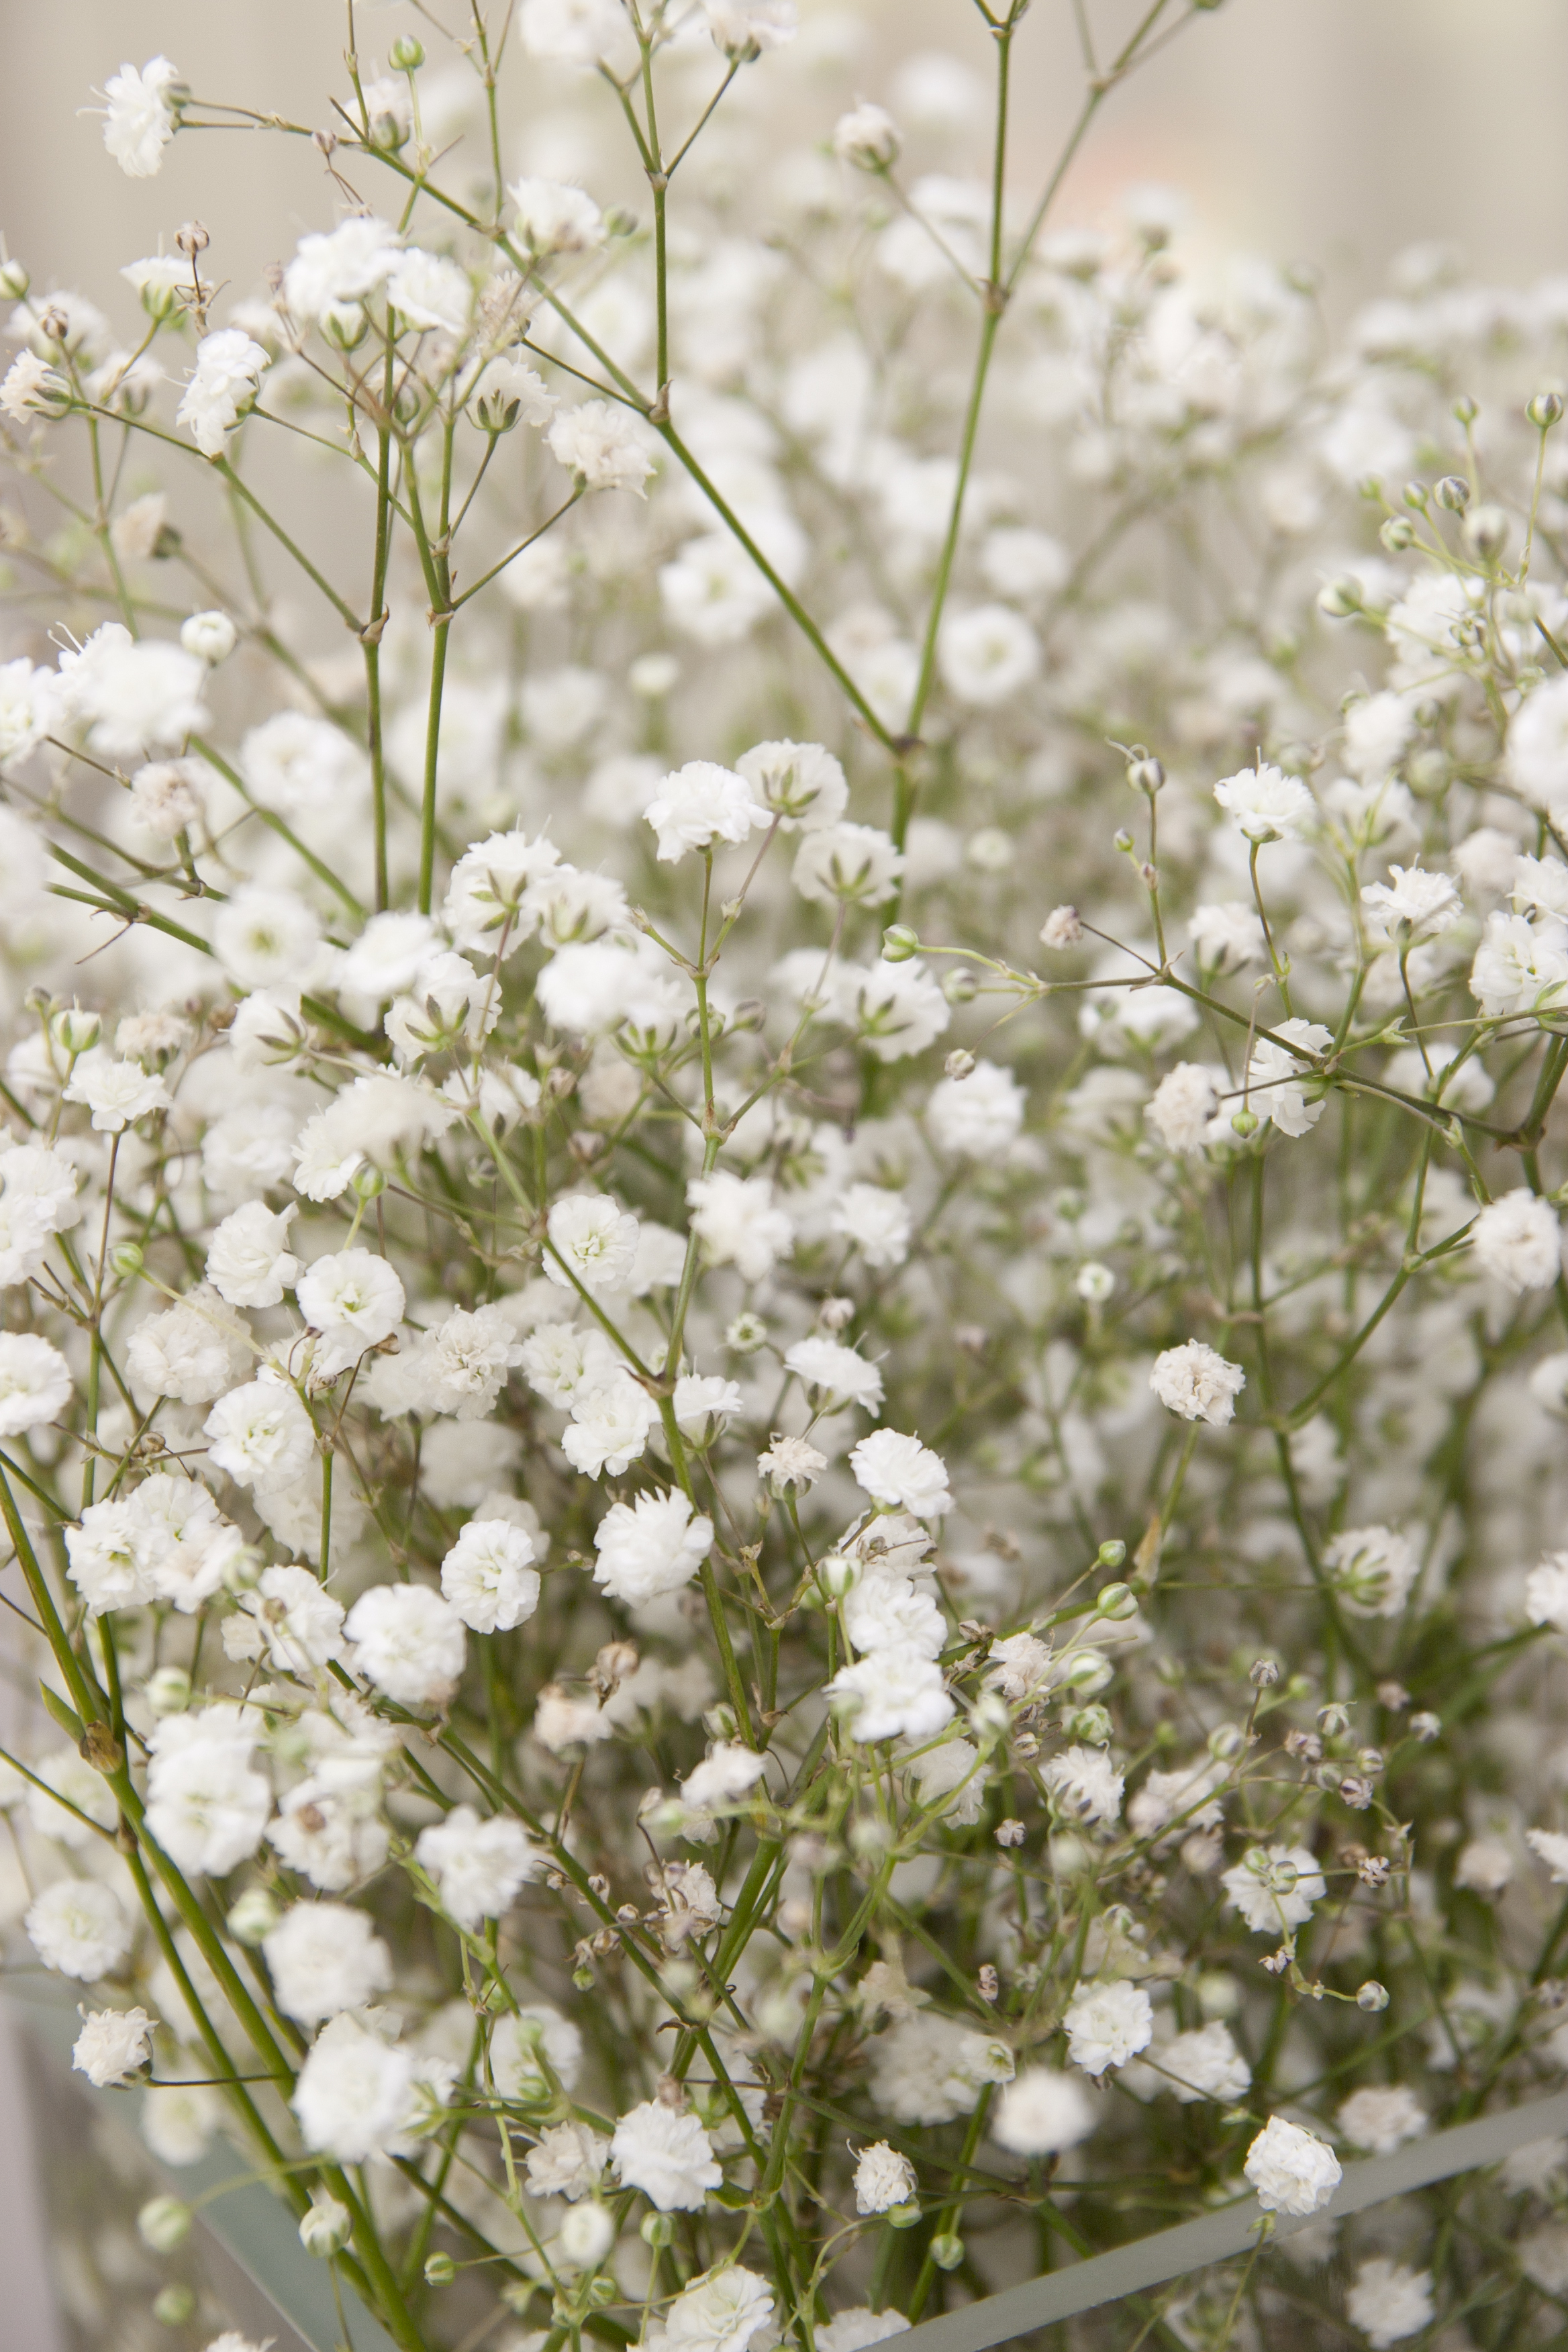 Pet Poison Helpline Baby's Breath Flower Toxicity to Pets